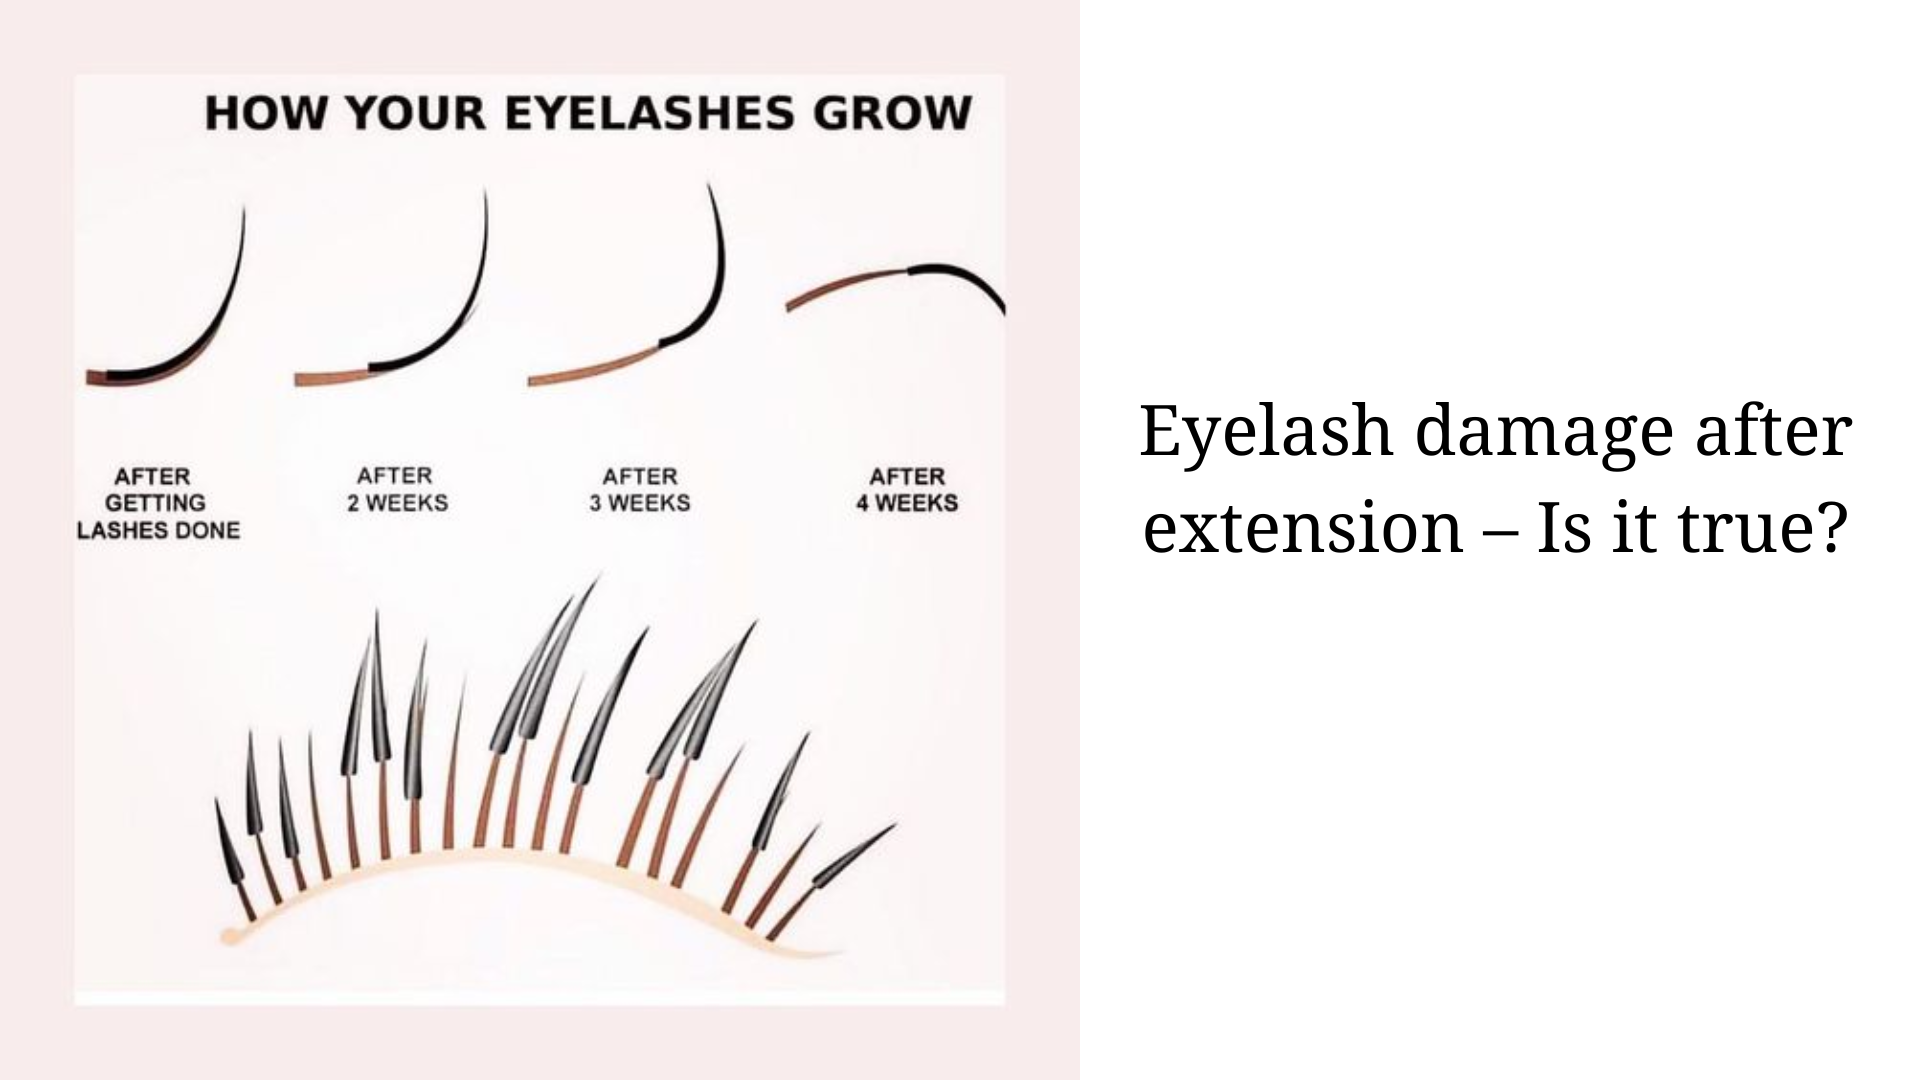 Eyelash damage after extension – Is it true?